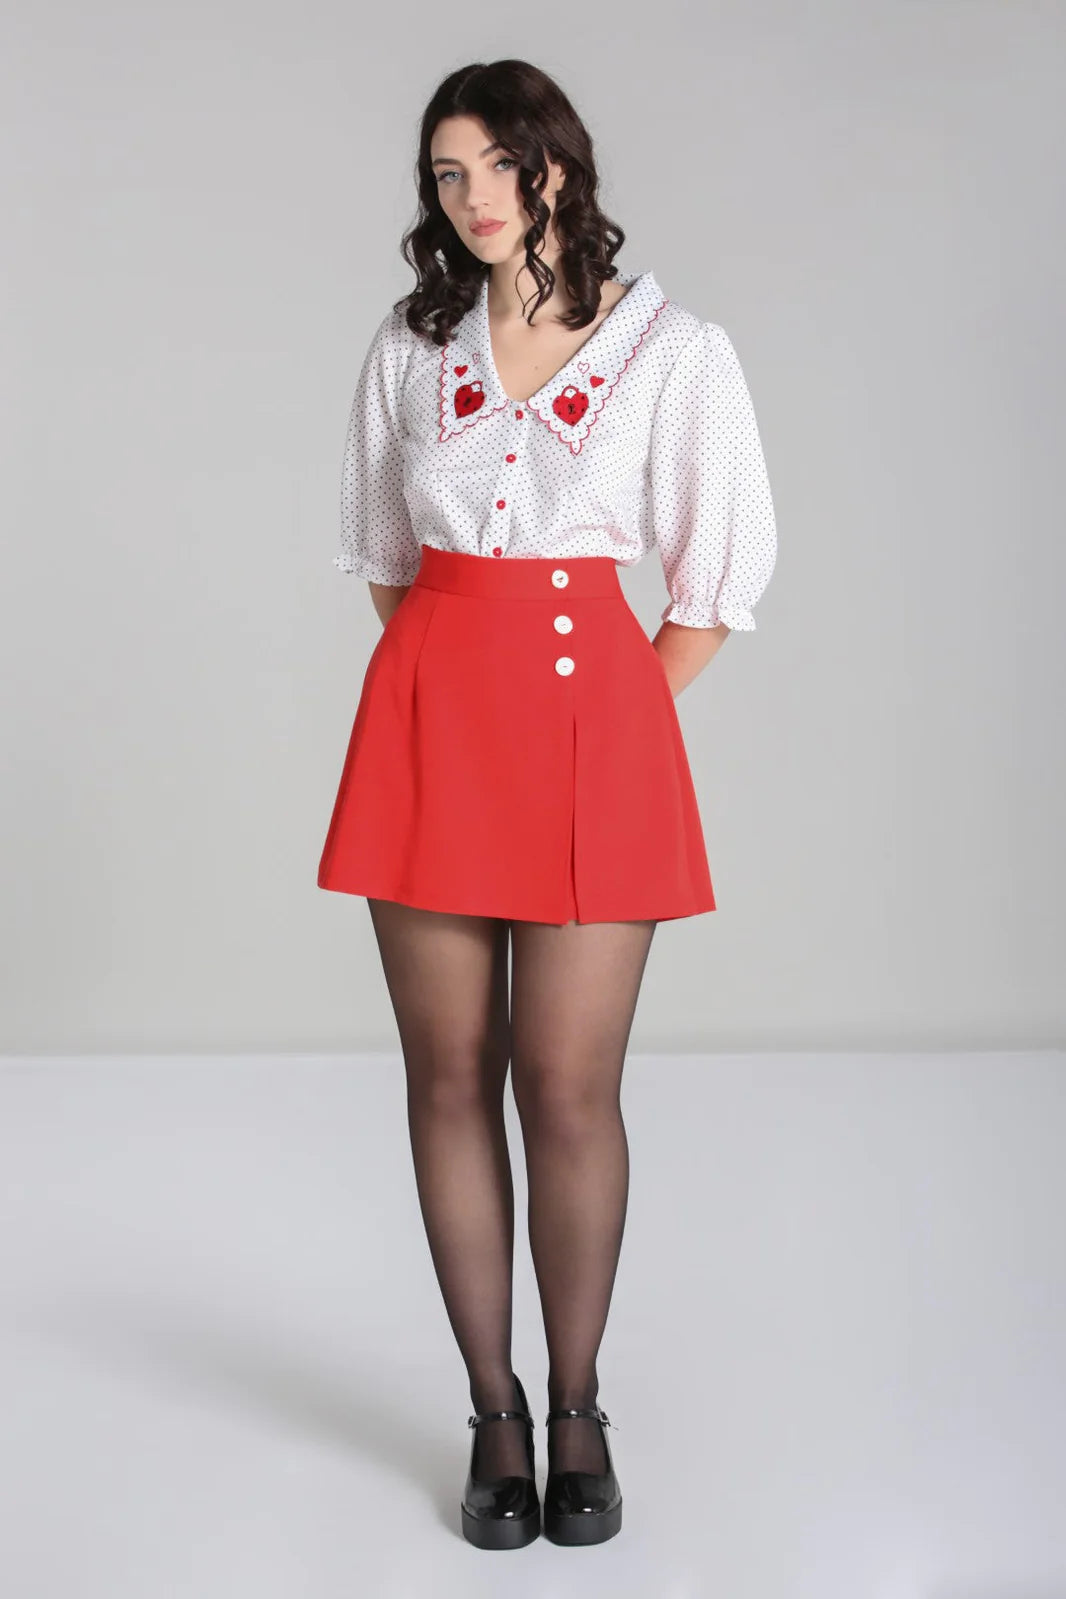 Cooper Retro Red Skorts by Hell Bunny